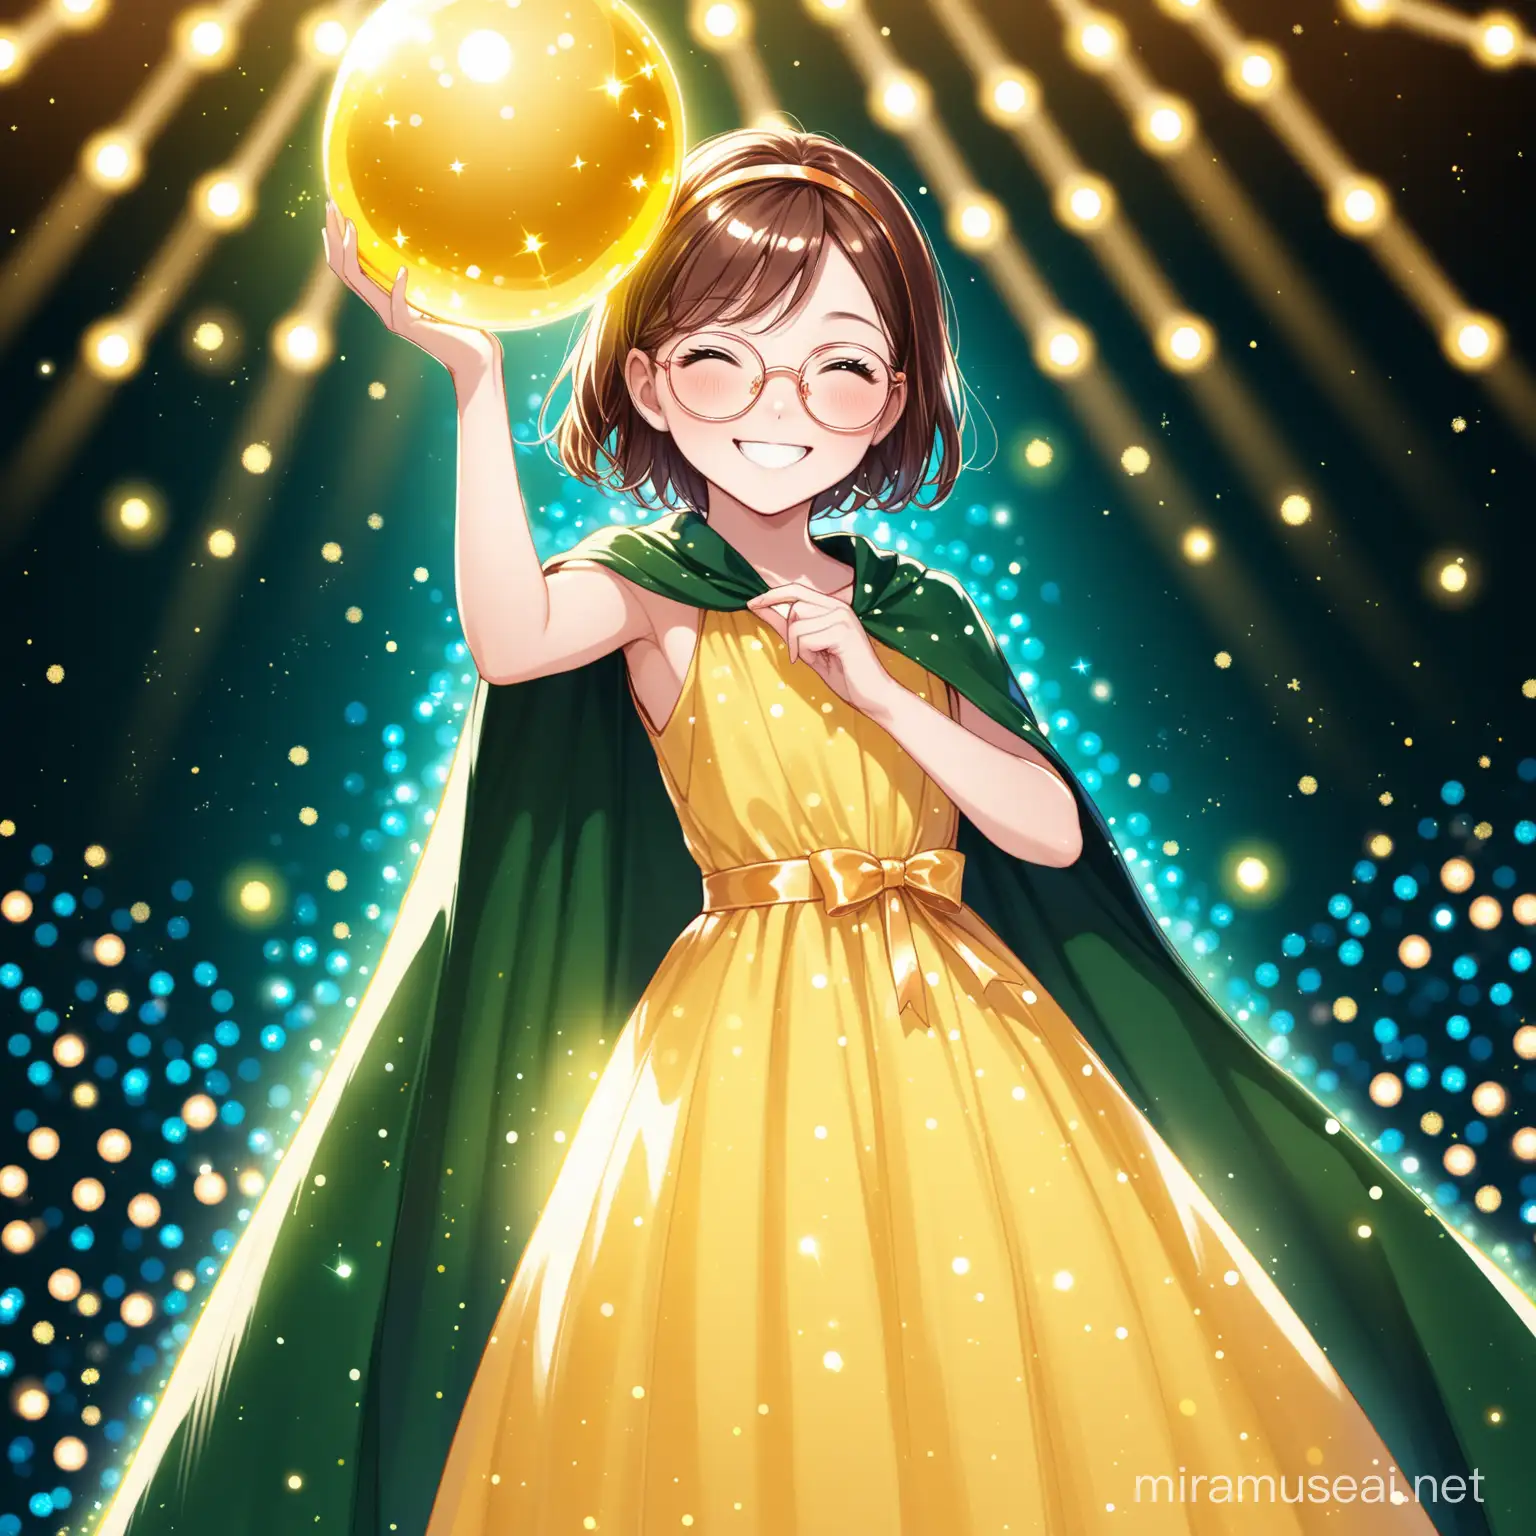 Smiling Girl in Yellow Dress with Glowing Ball on Stage